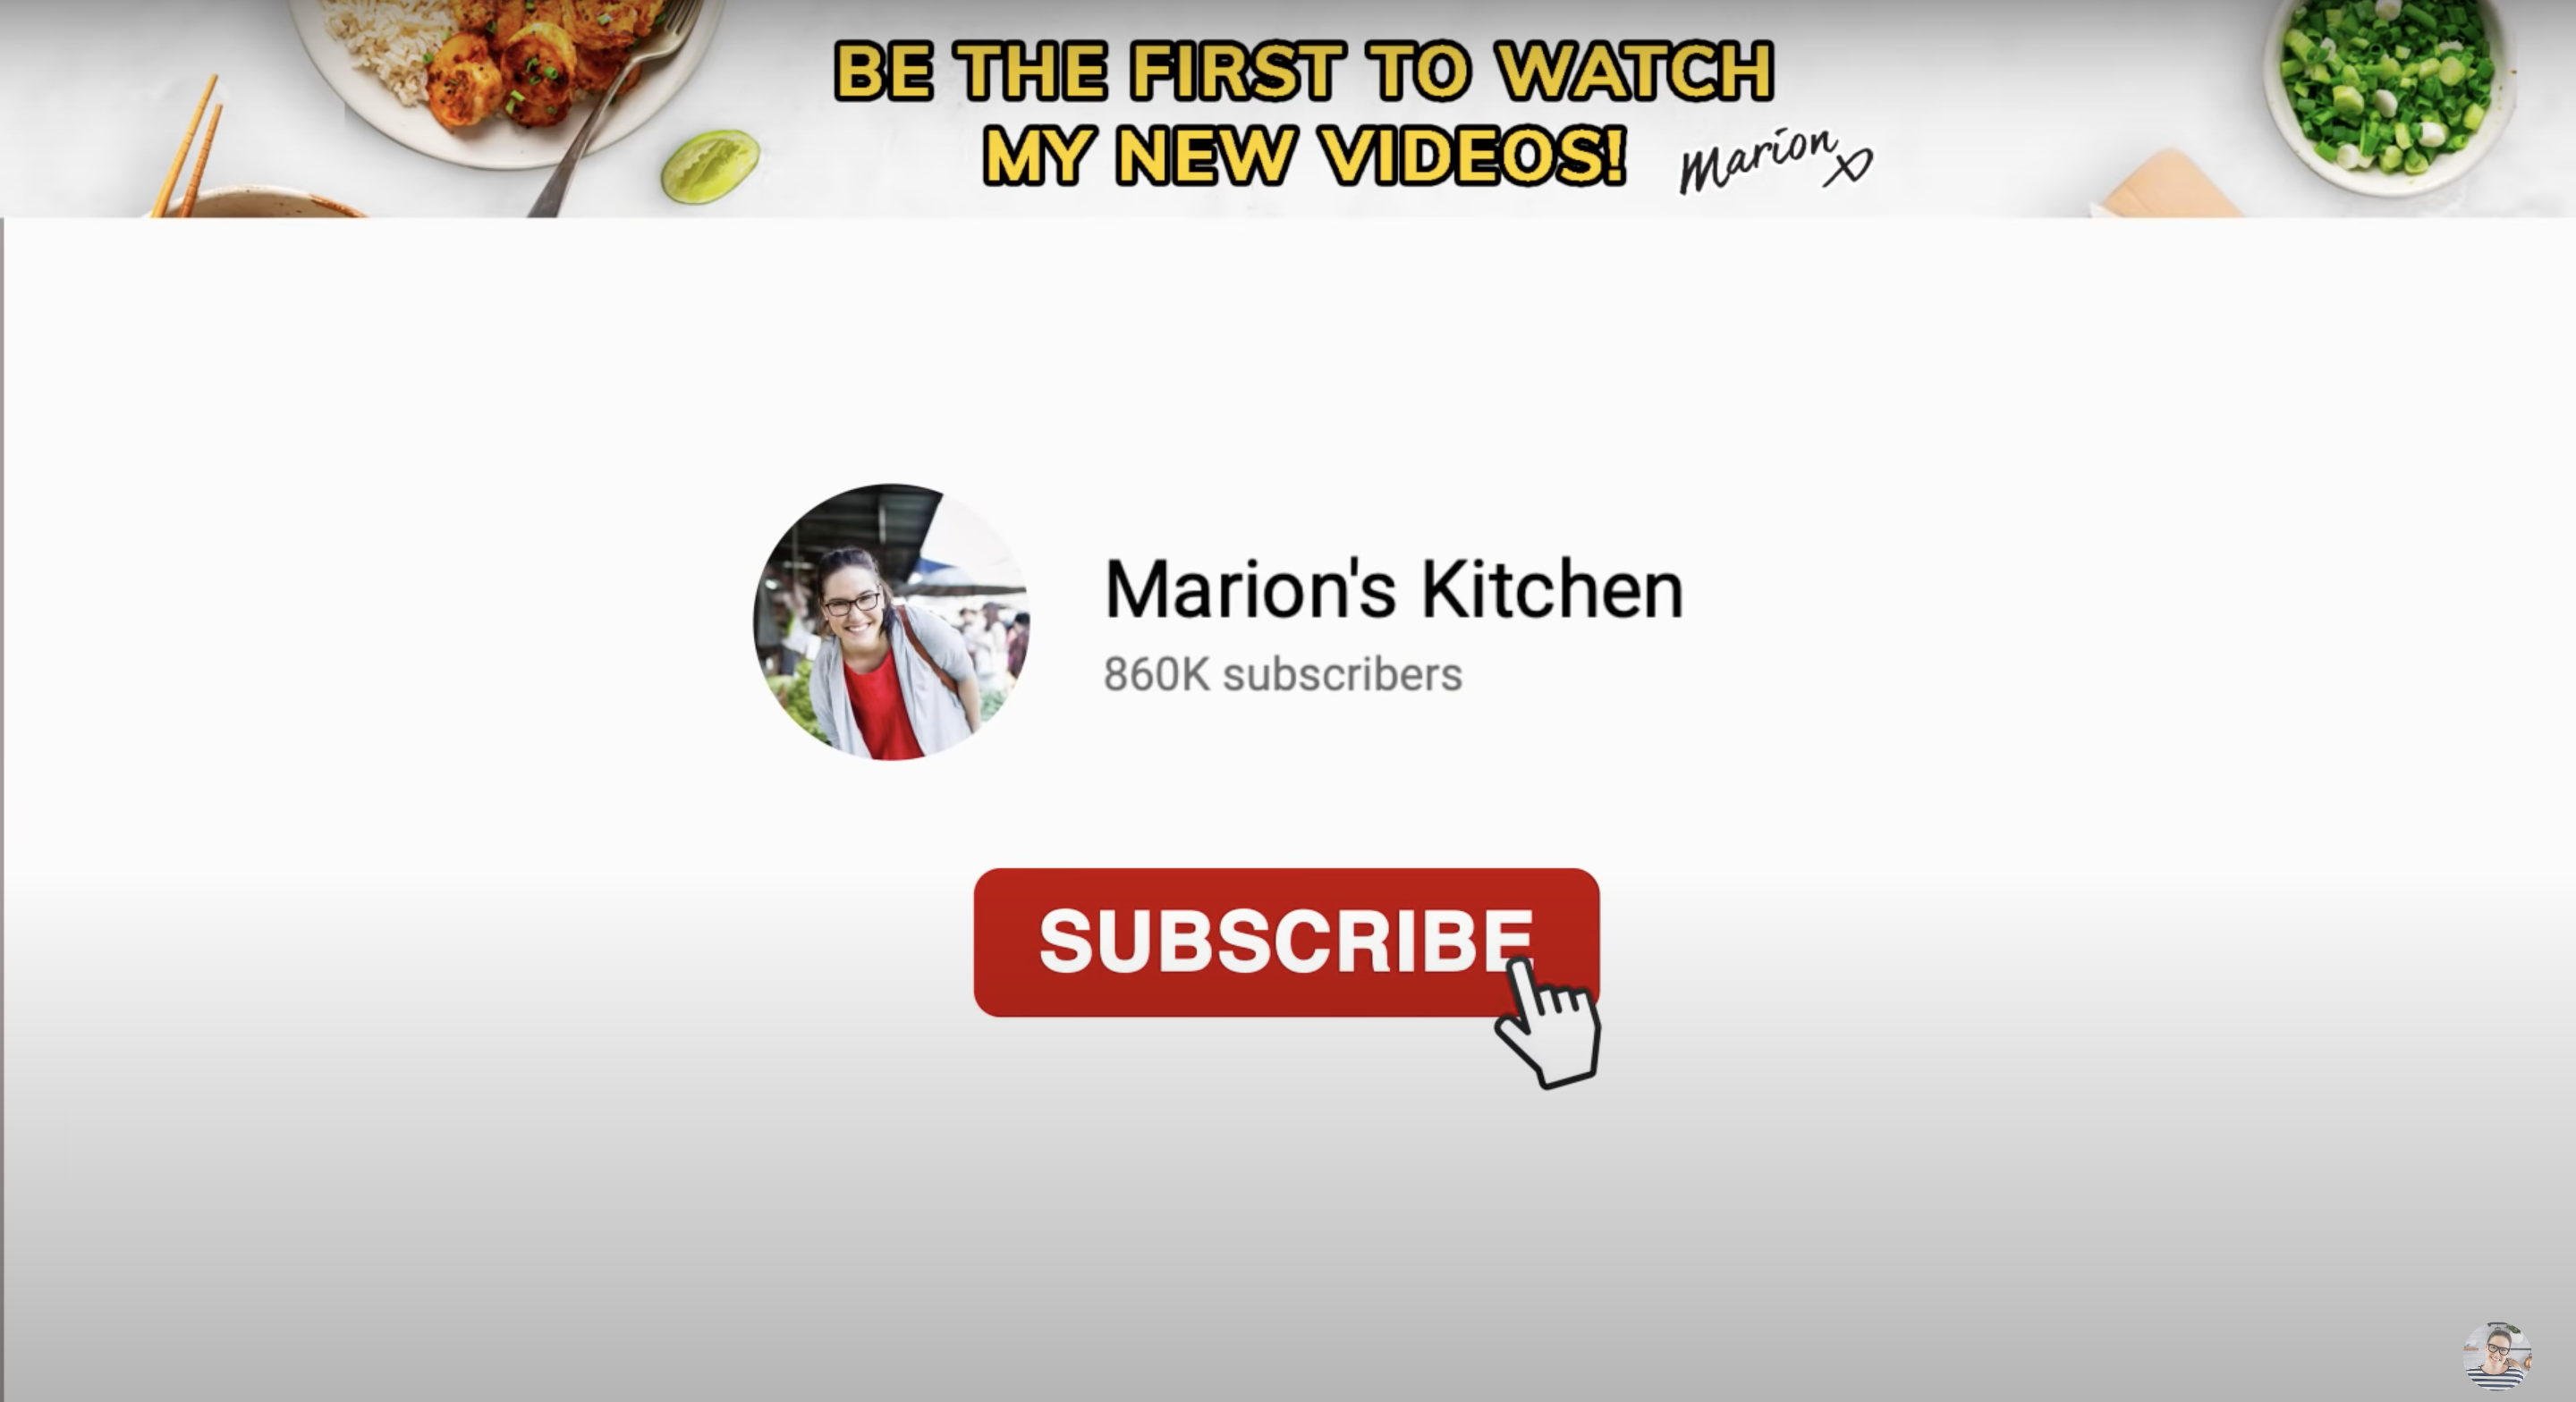 Mouse hovering over "subscribe" icon for Marion's Kitchen YouTube channel, from YouTube video "What's My Marion's Kitchen Channel All About?"